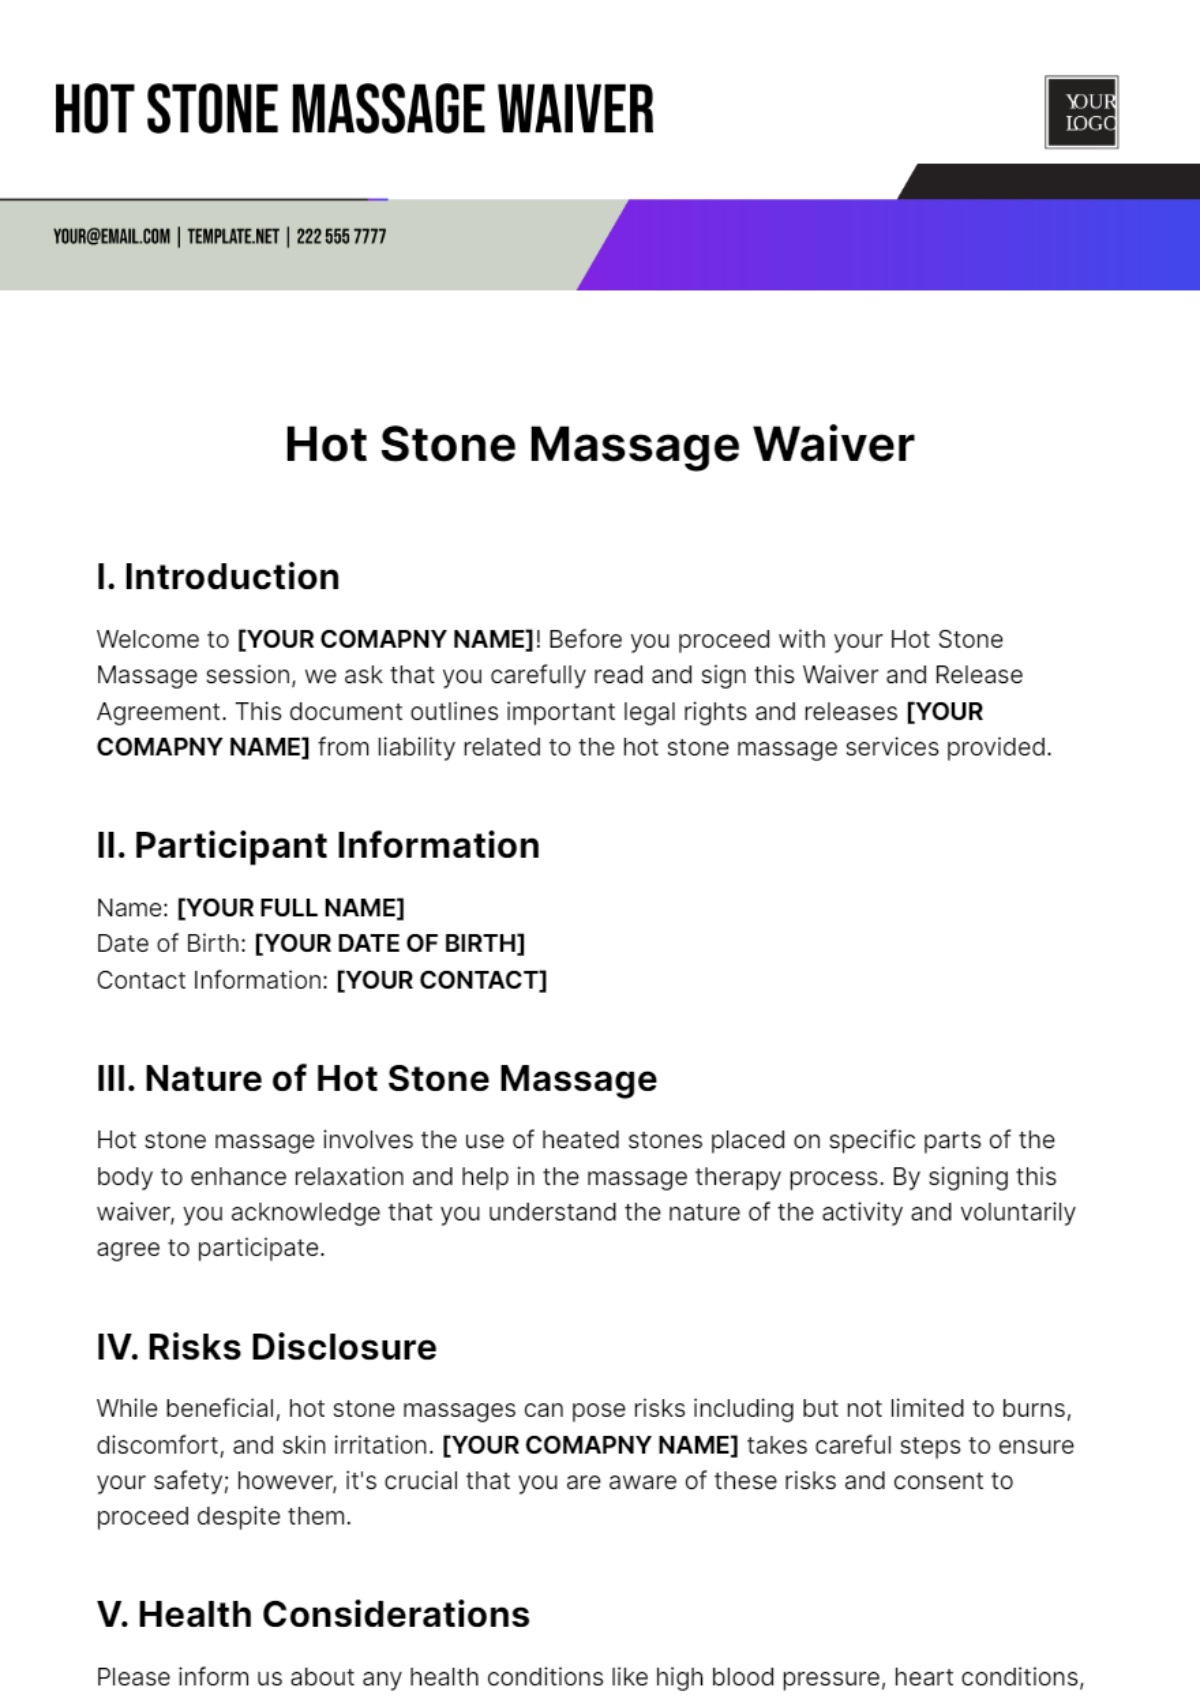 Hot Stone Massage Waiver Template